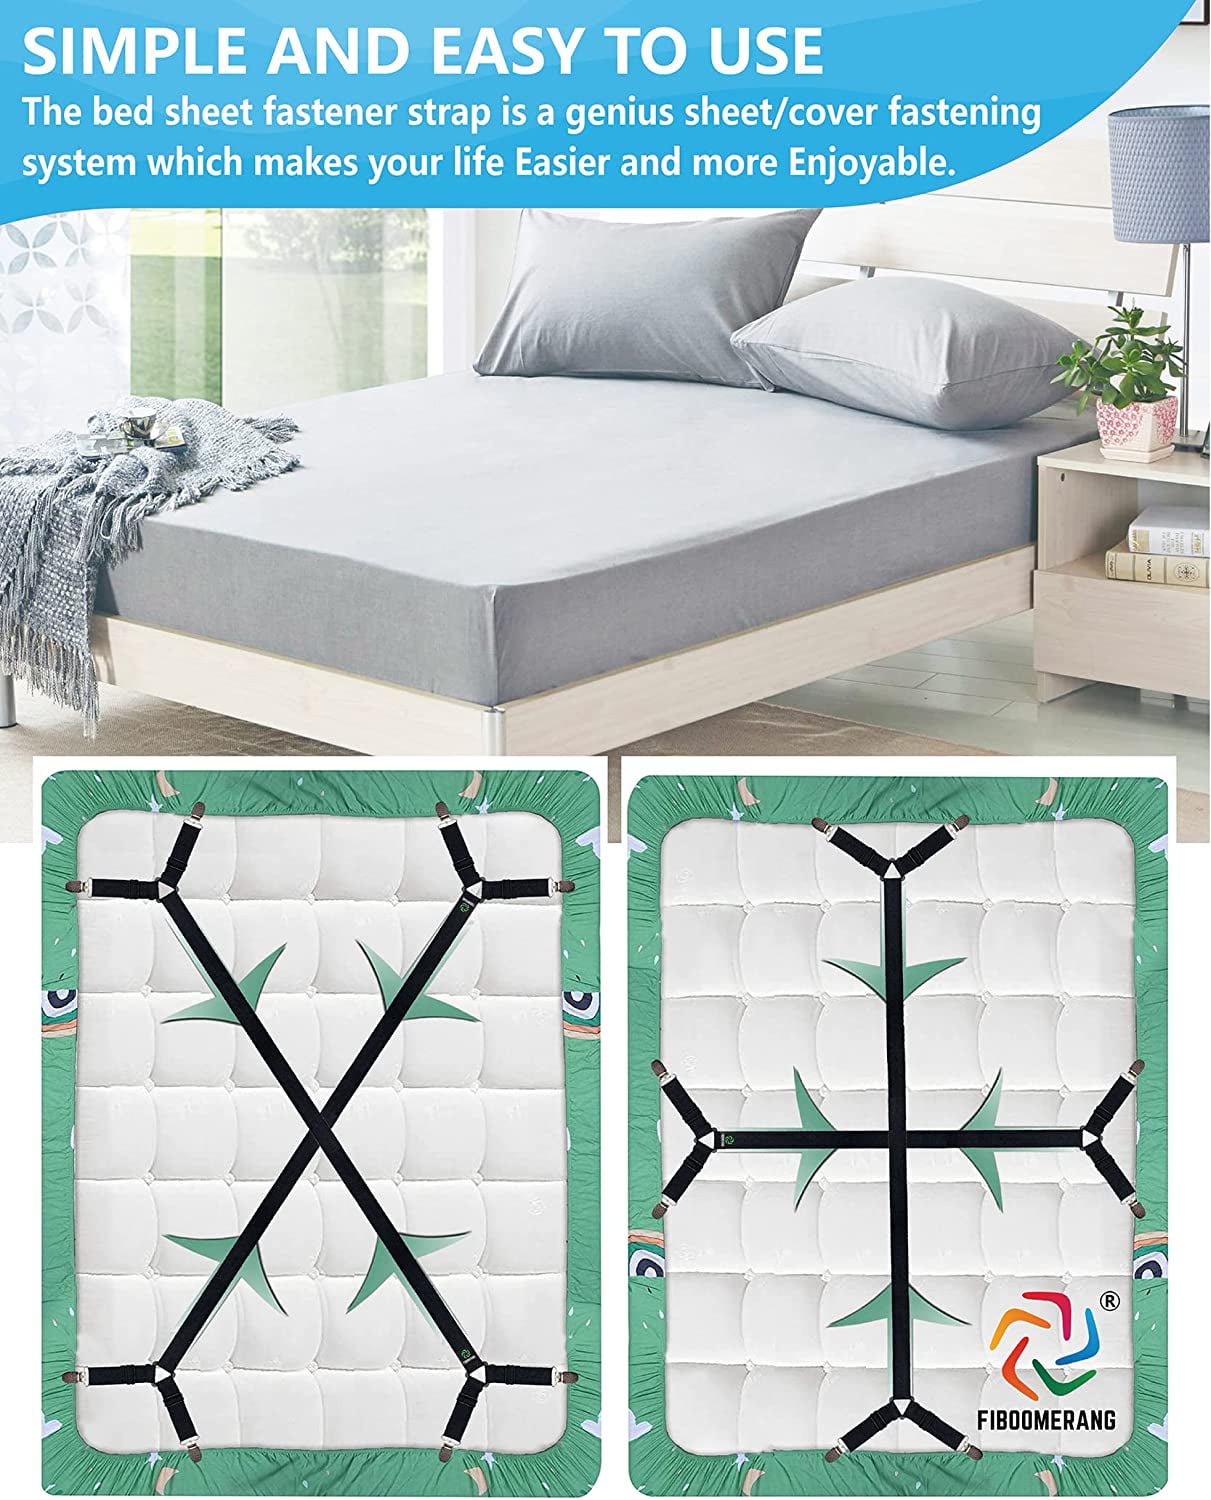 2 Pcs Bed Sheet Holder Straps Adjustable Sheets Stays Keepers with